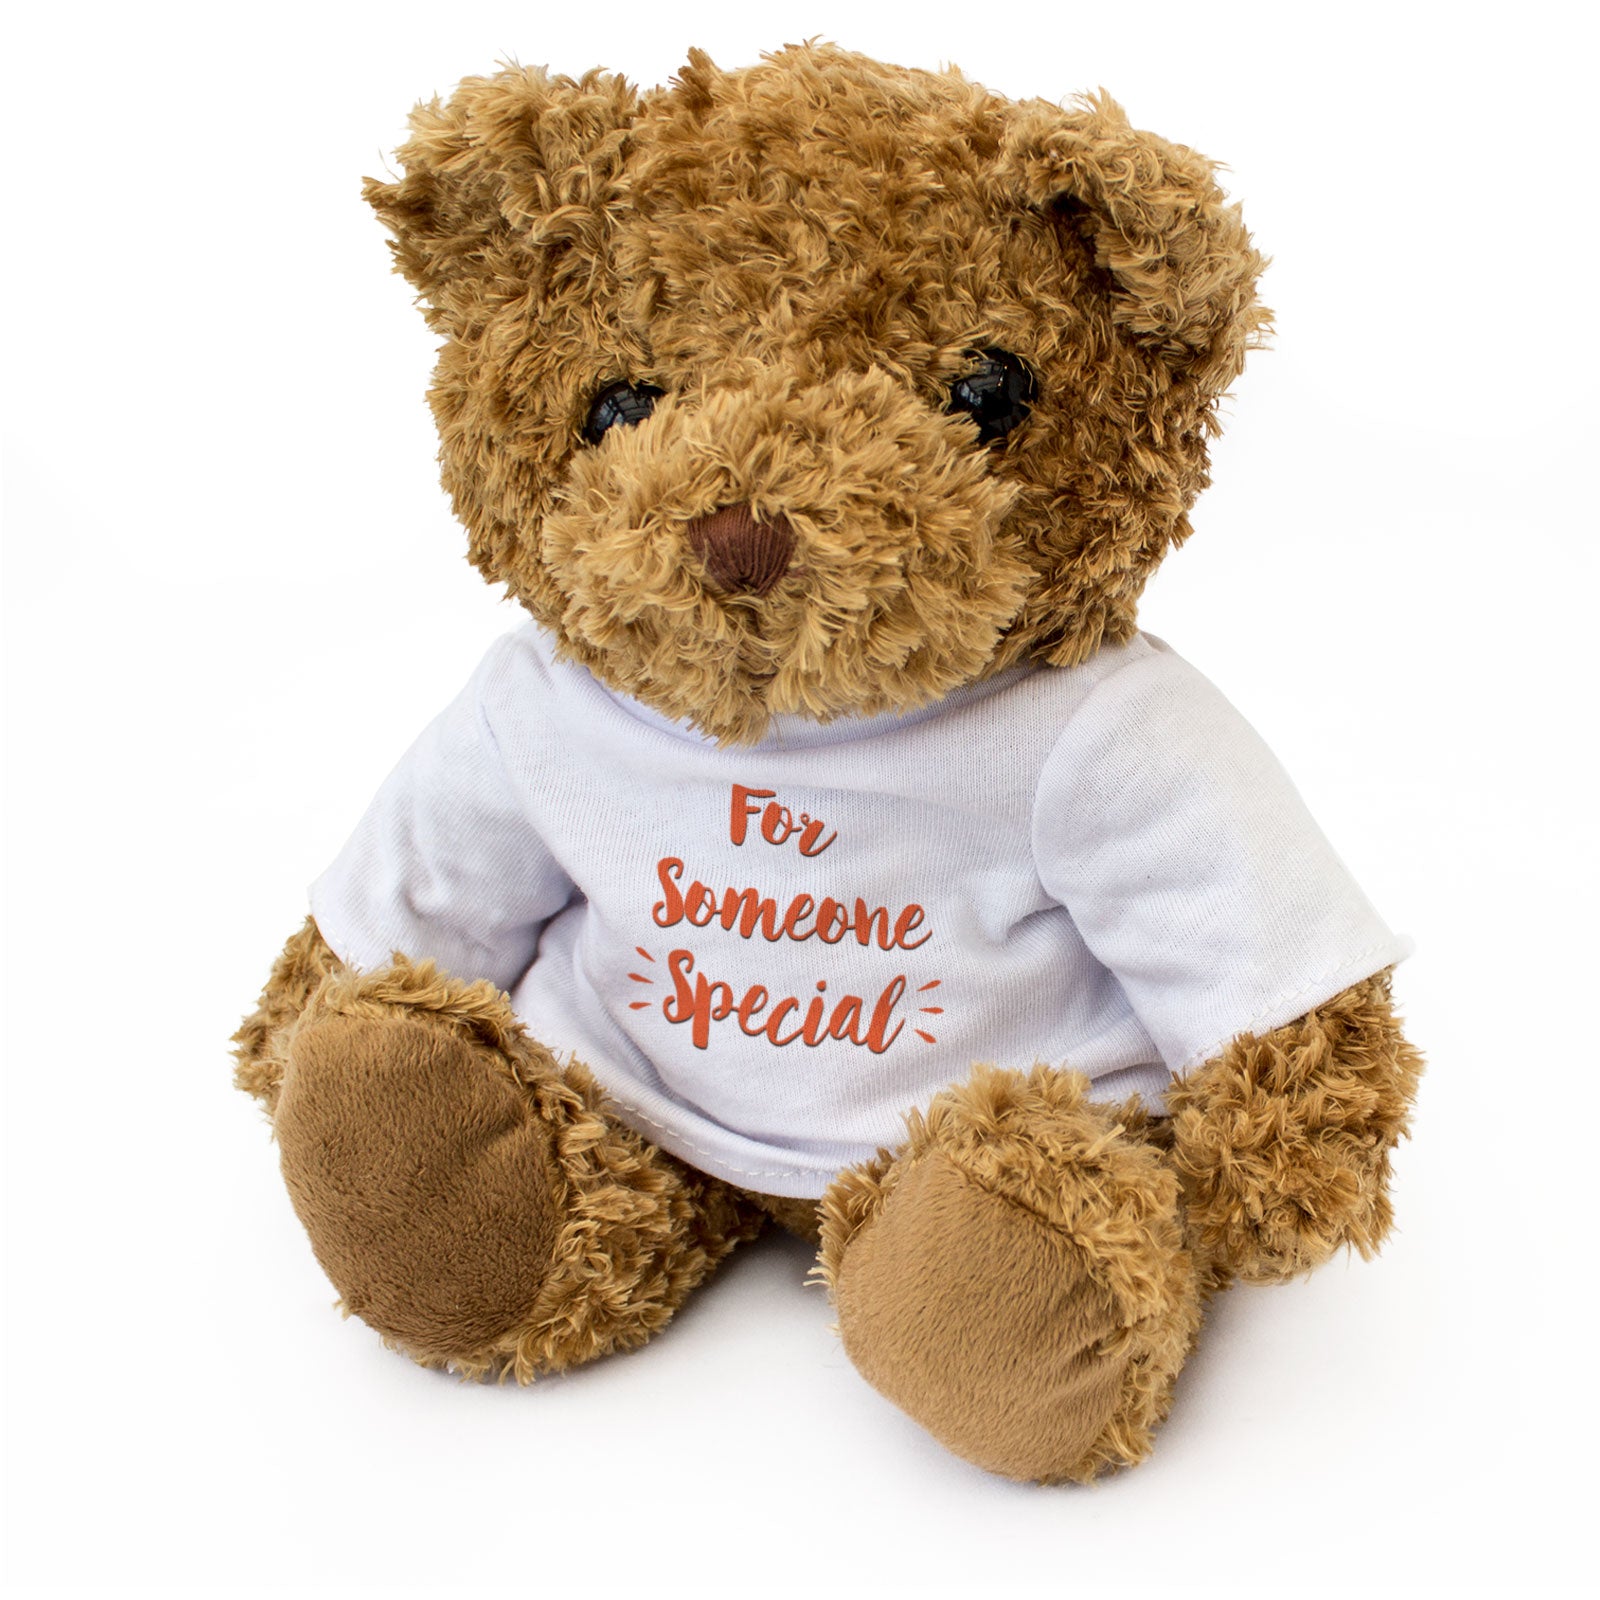 For Someone Special - Teddy Bear